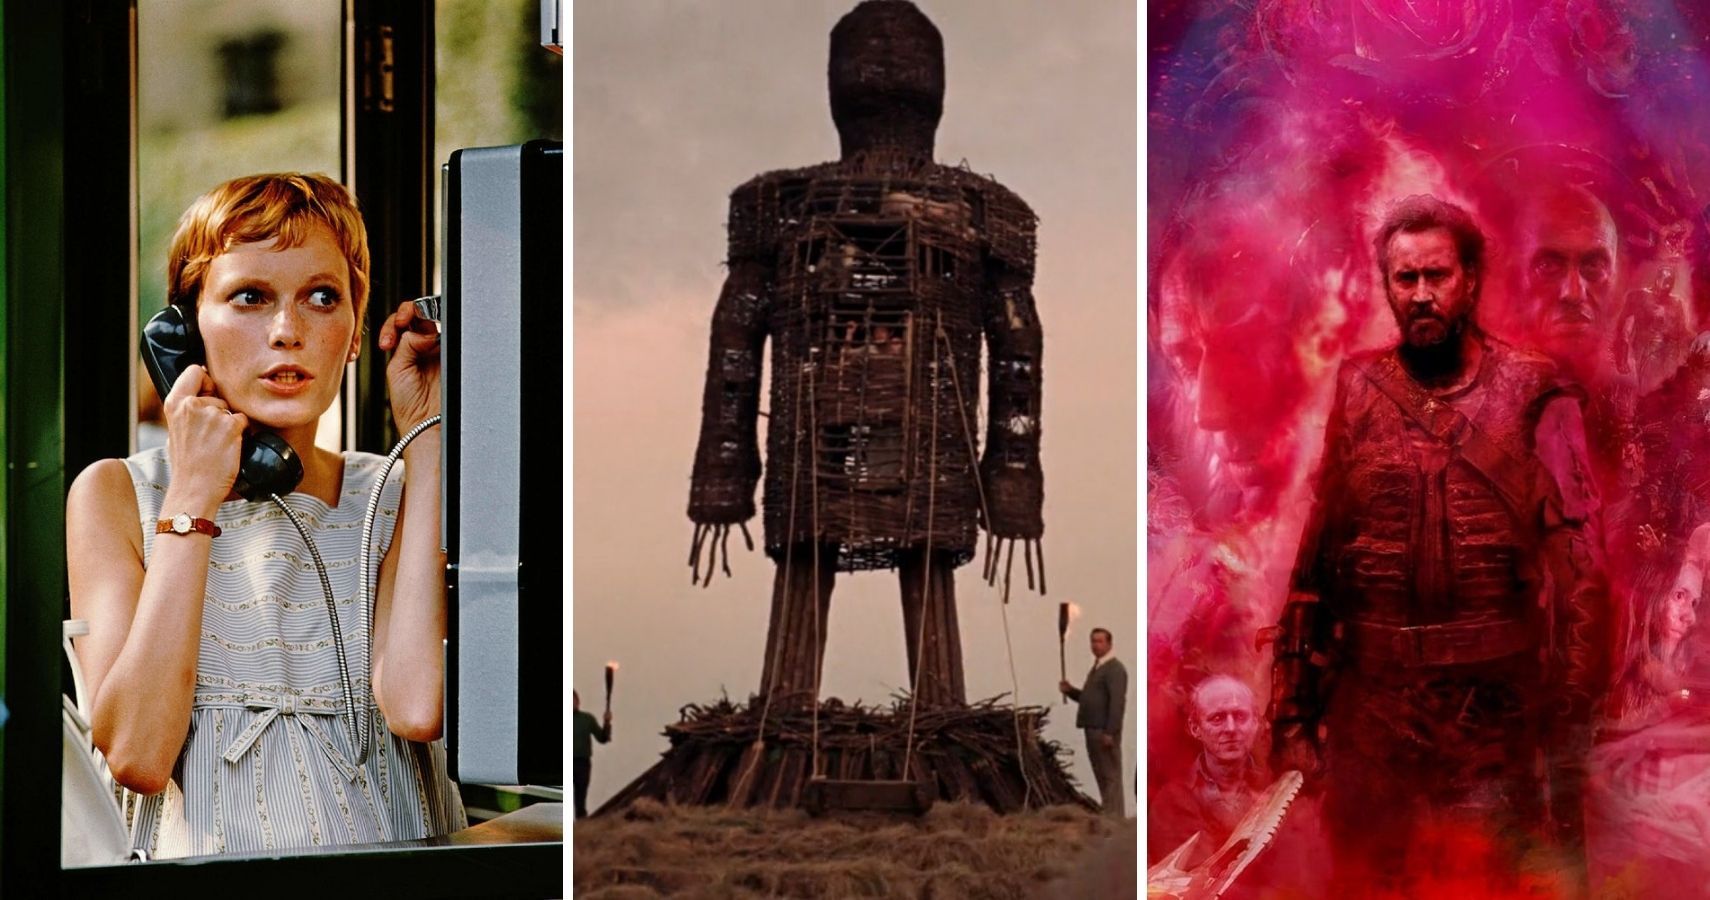 The Creepiest Movies About Cults Ranked (According To IMDb)